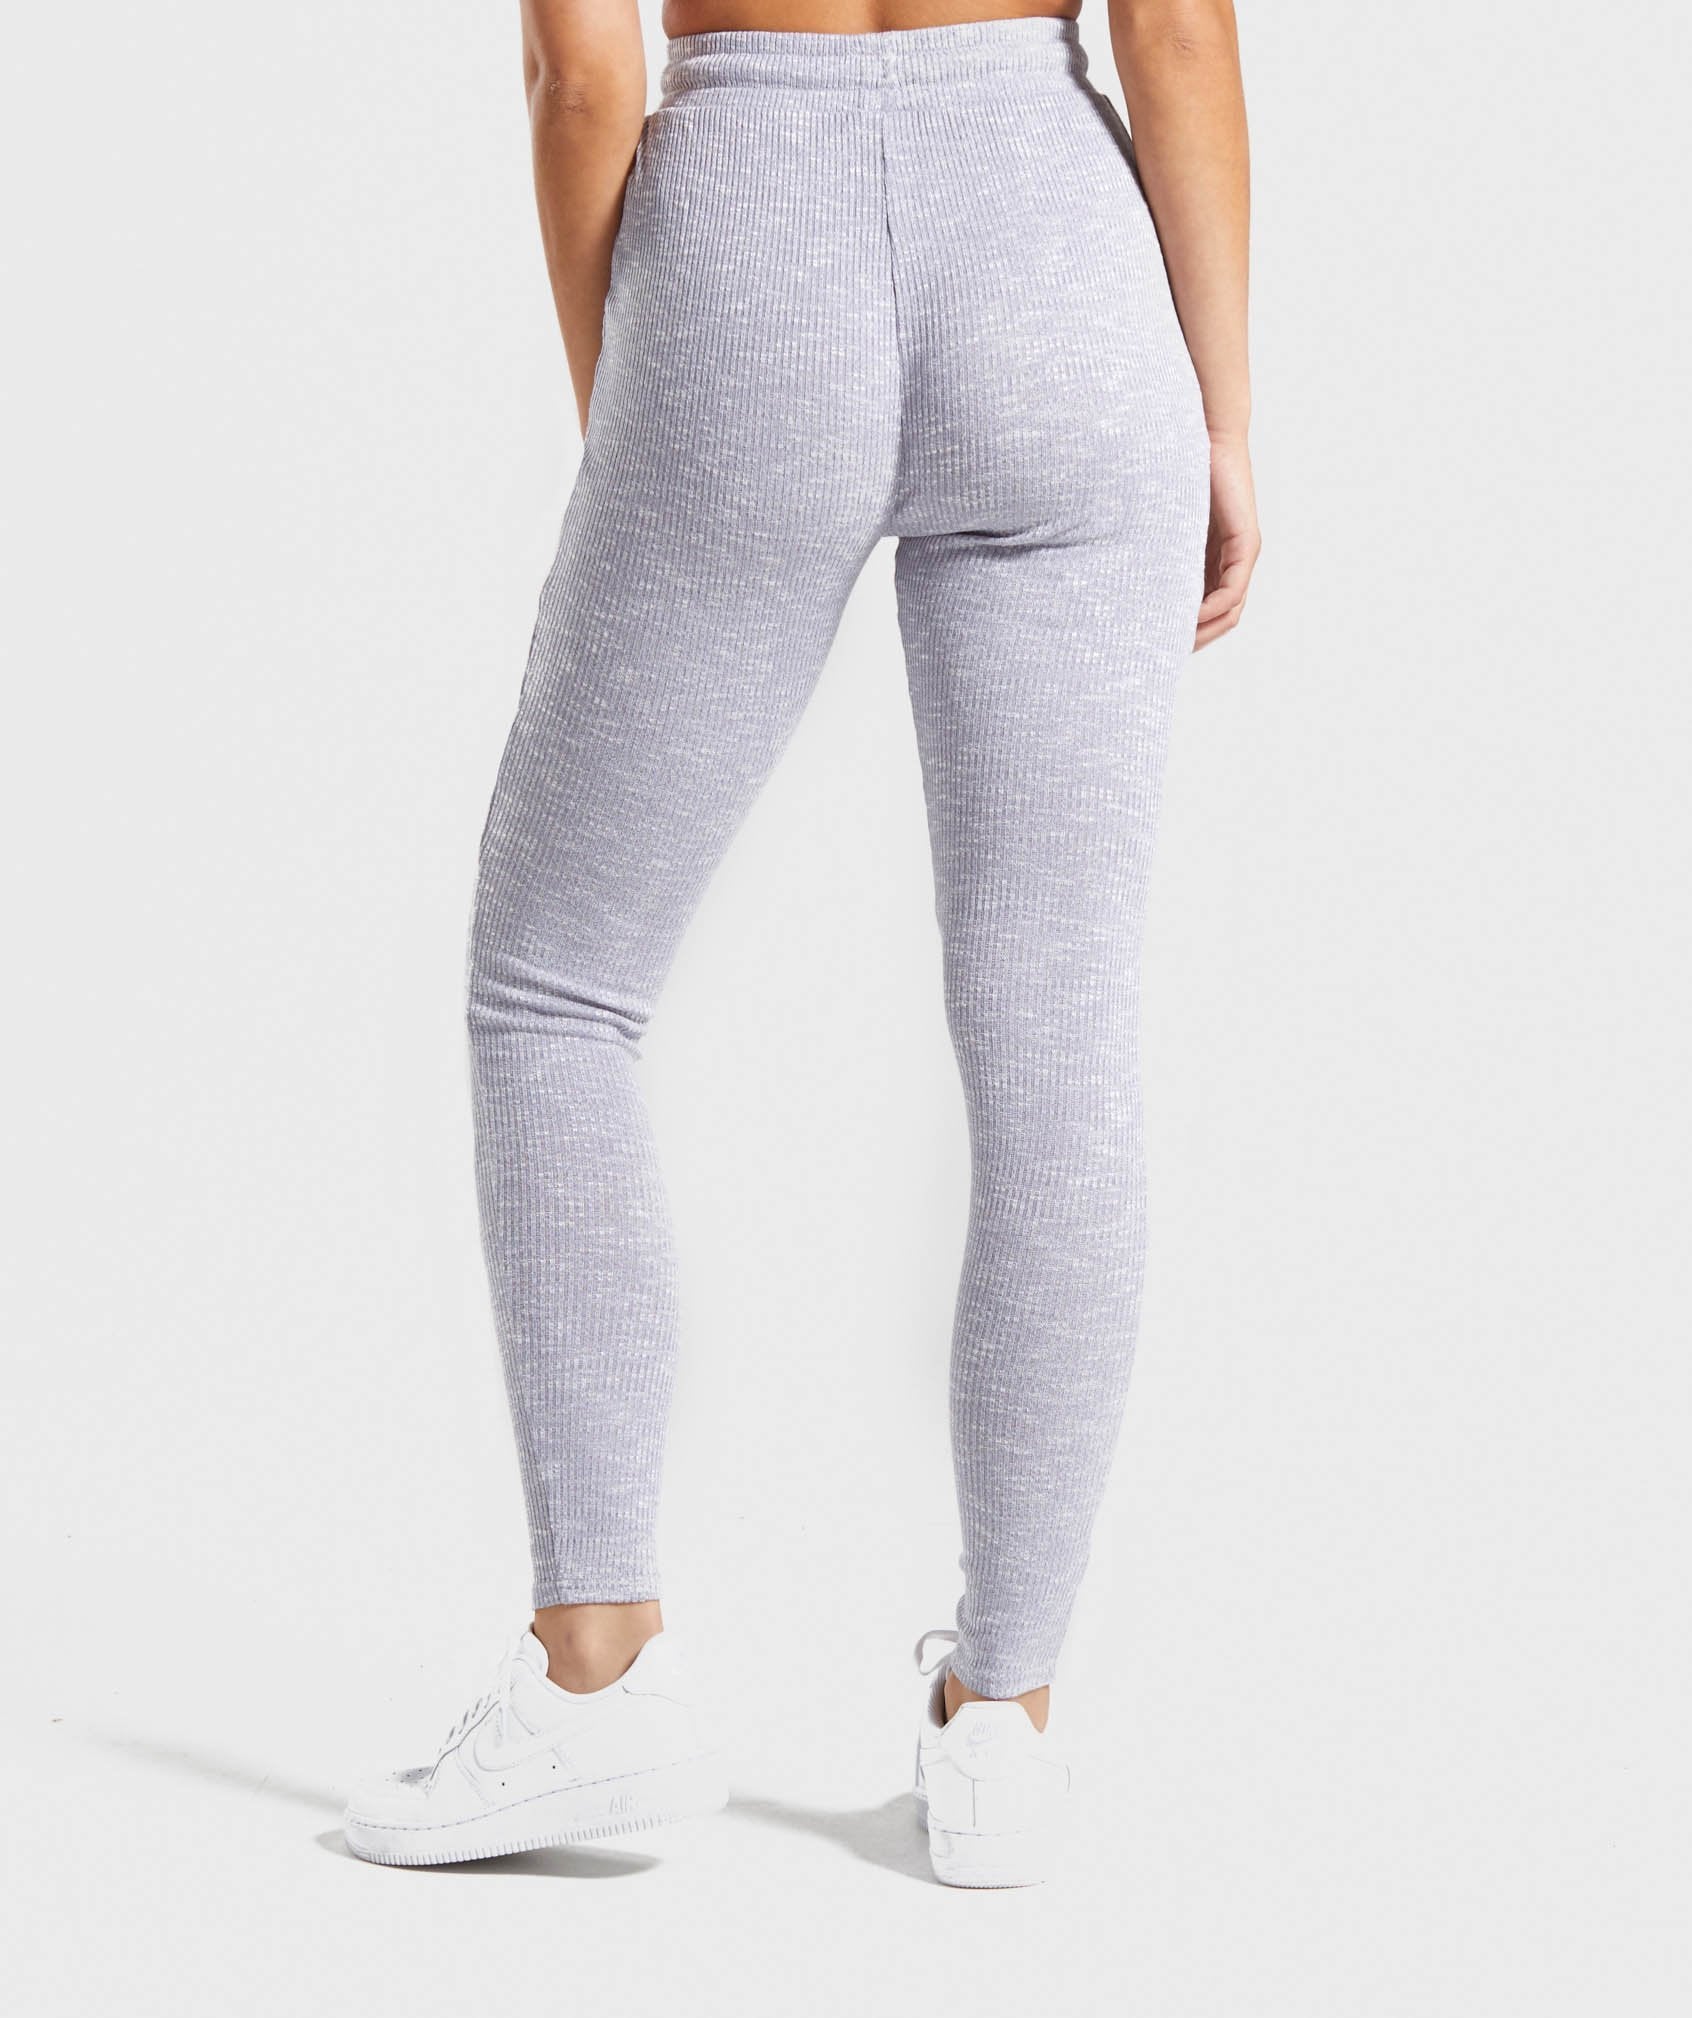 Slounge Leggings in Lilac Marl - view 1